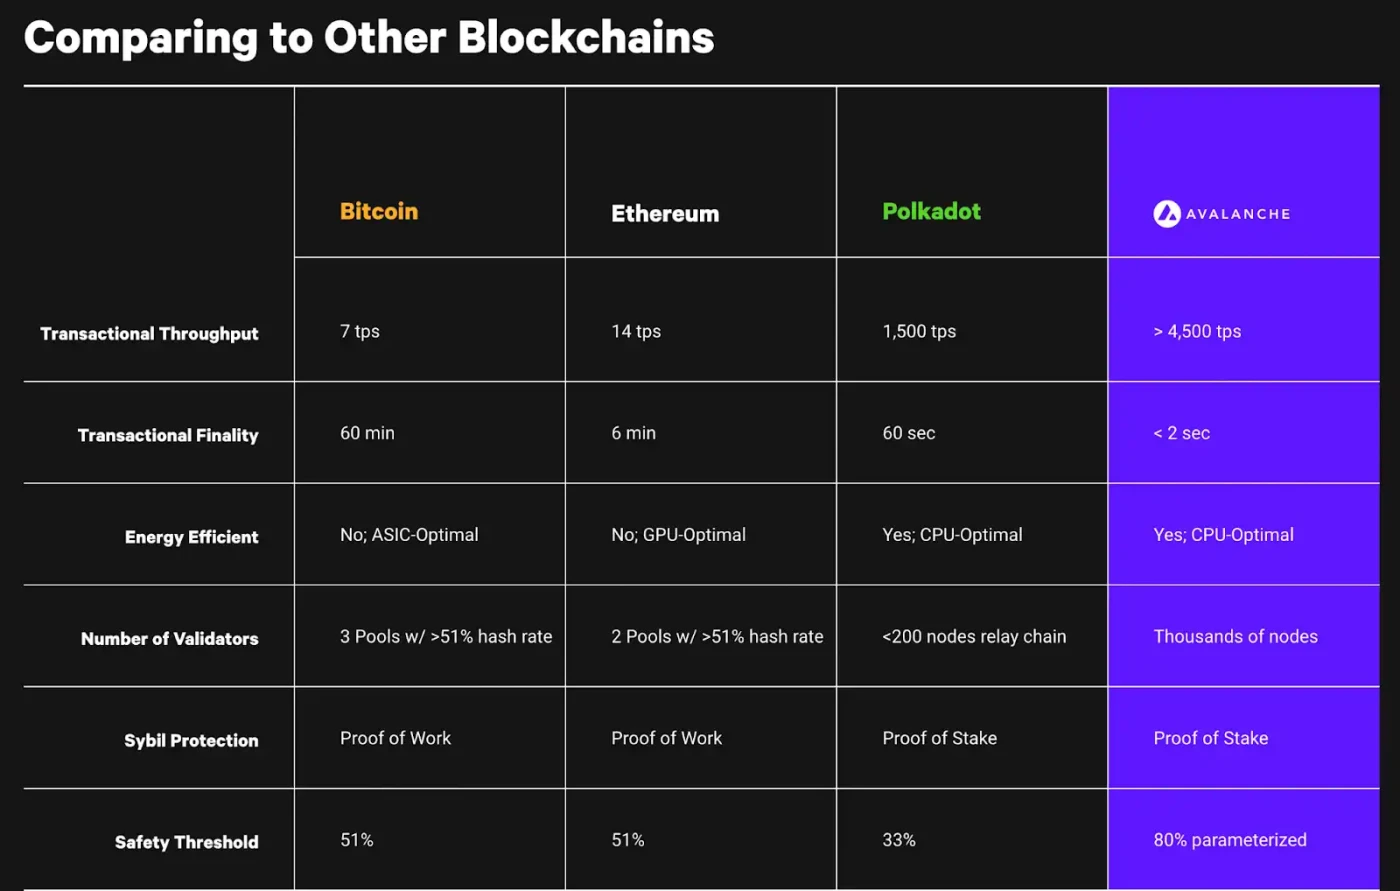 Screenshot of a comparative table comparing Bitcoin, Ethereum, Polkadot, and Avalanche in terms of transaction throughput, finality, energy efficiency, number of validators, Sybil protection, and safety threshold.